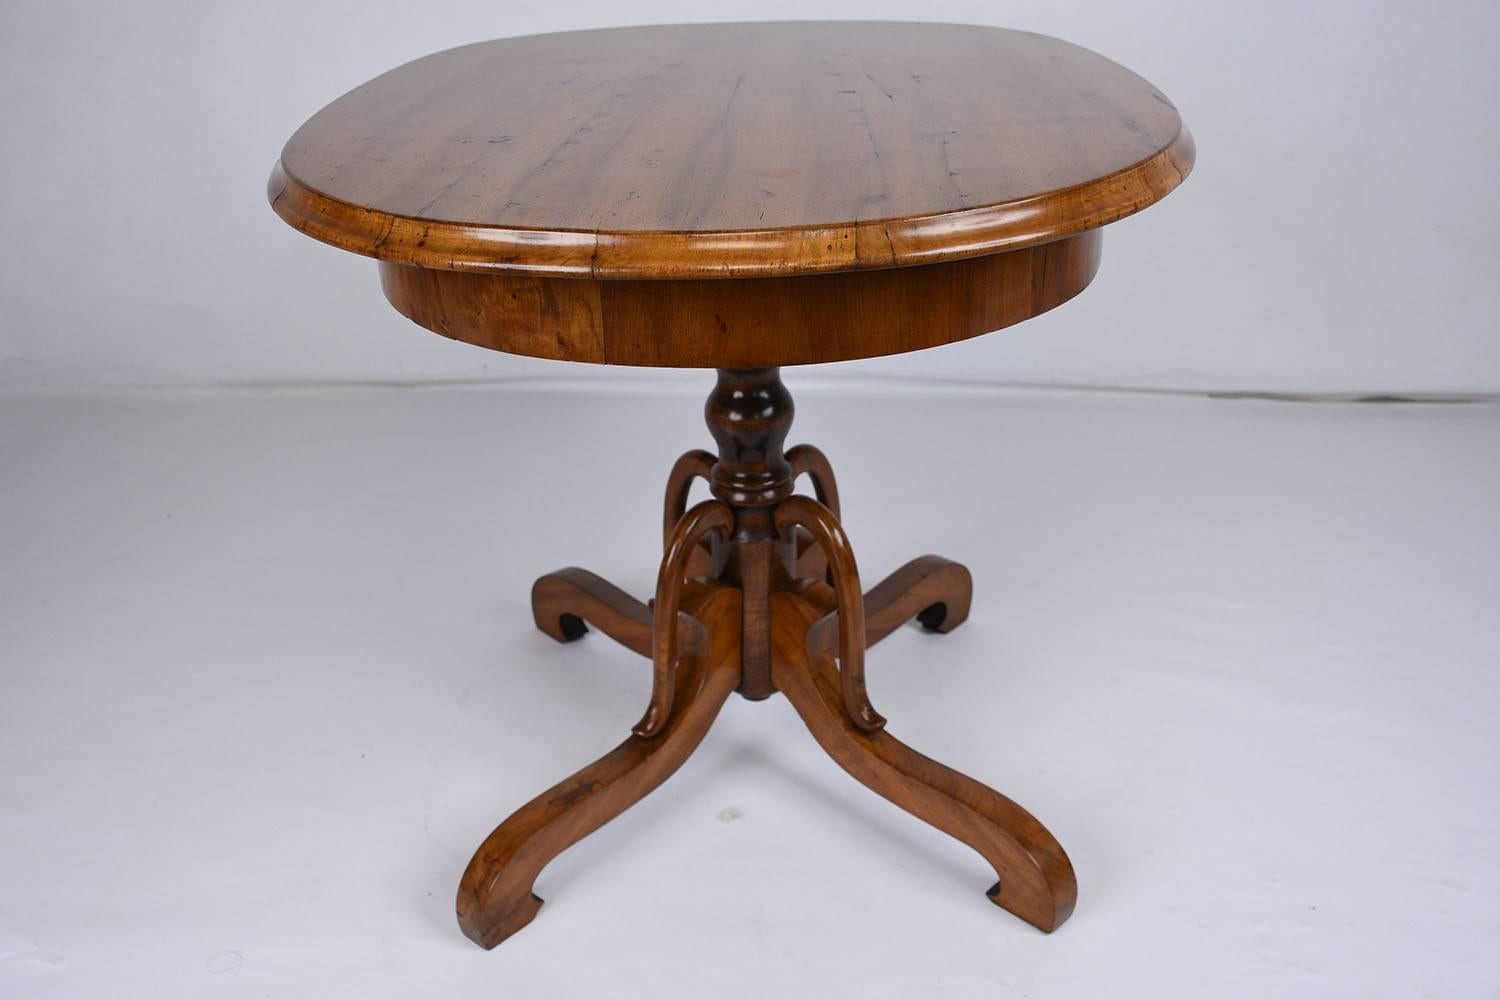 This stunning 1830s antique French Louis Philippe-style centre table is made of walnut wood with its original finish. The oval shaped table is wonderfully carved and features a great natural patina. The pedestal legs are uniquely carved with scroll